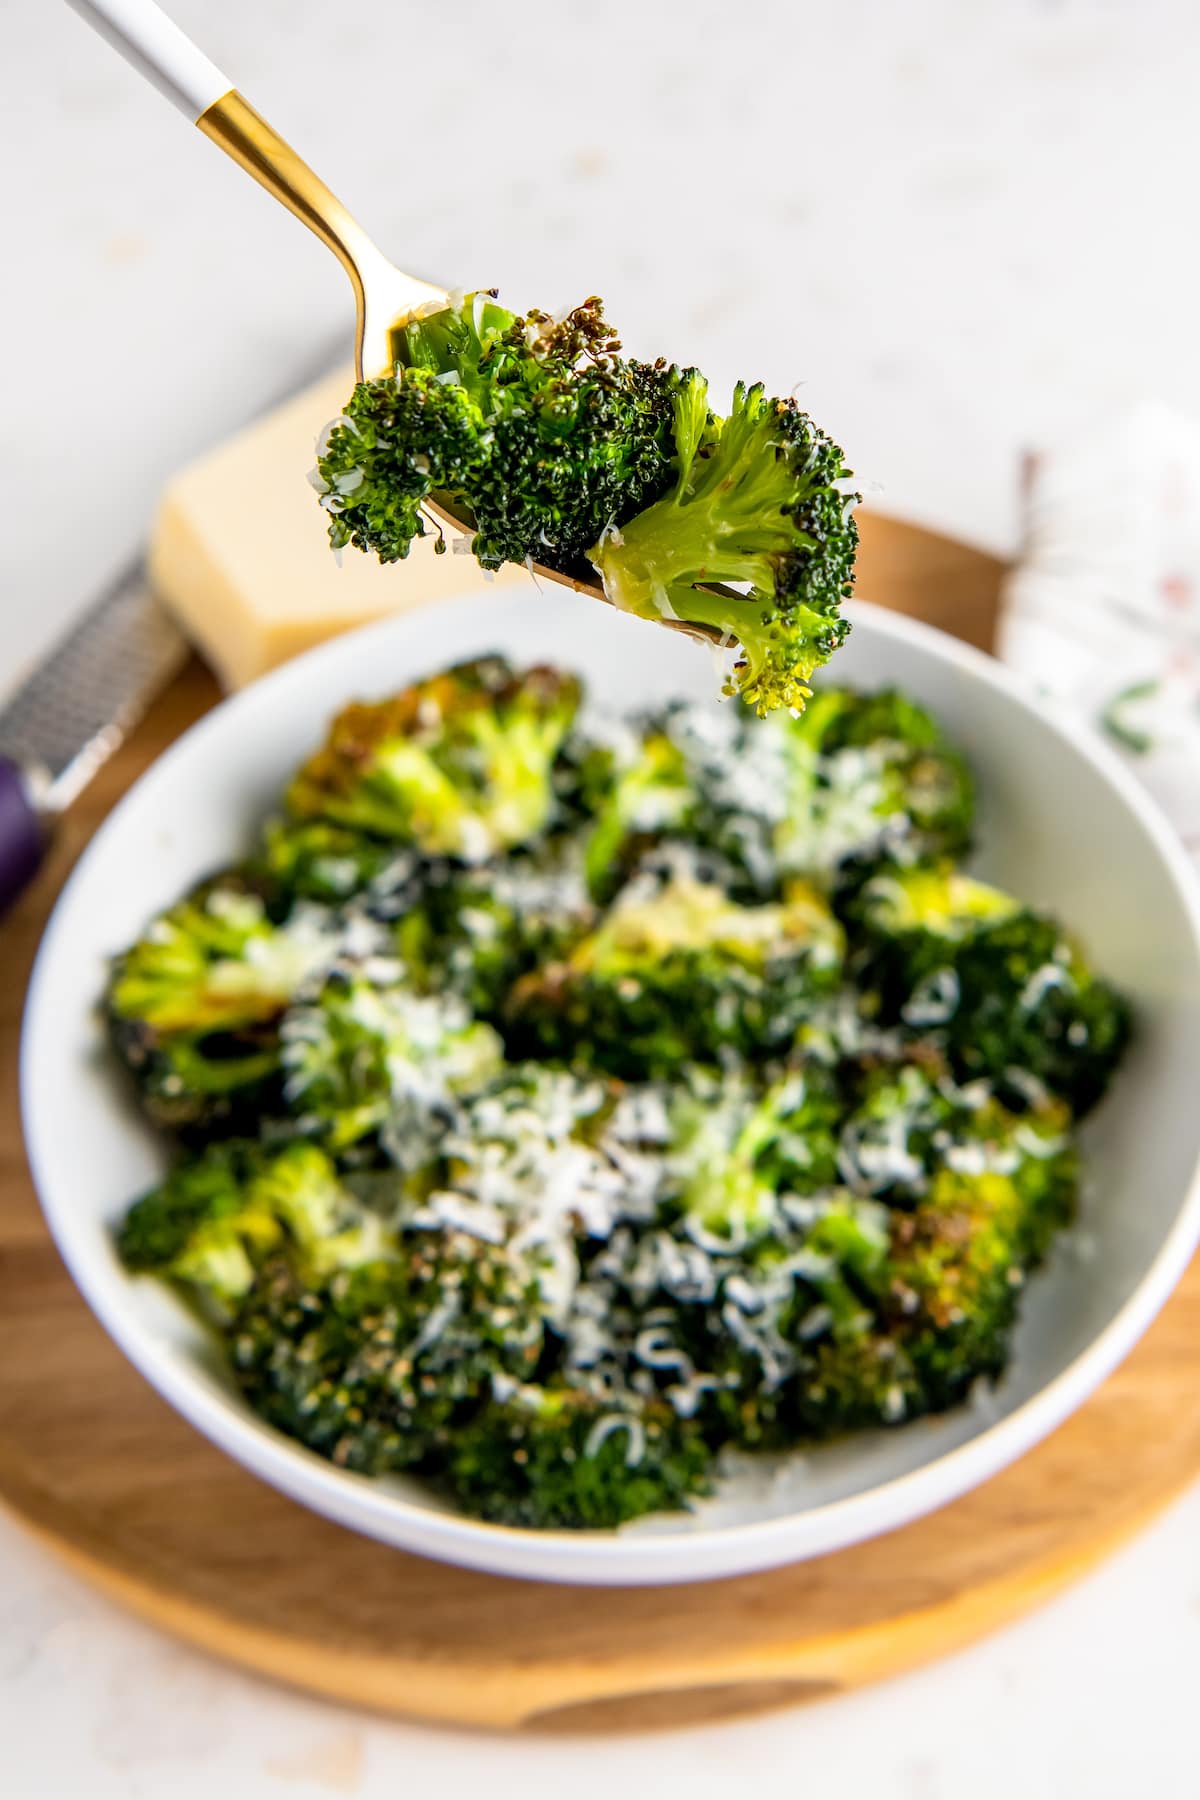 a bowl of cooked broccoli with sprinkled parmesan cheese